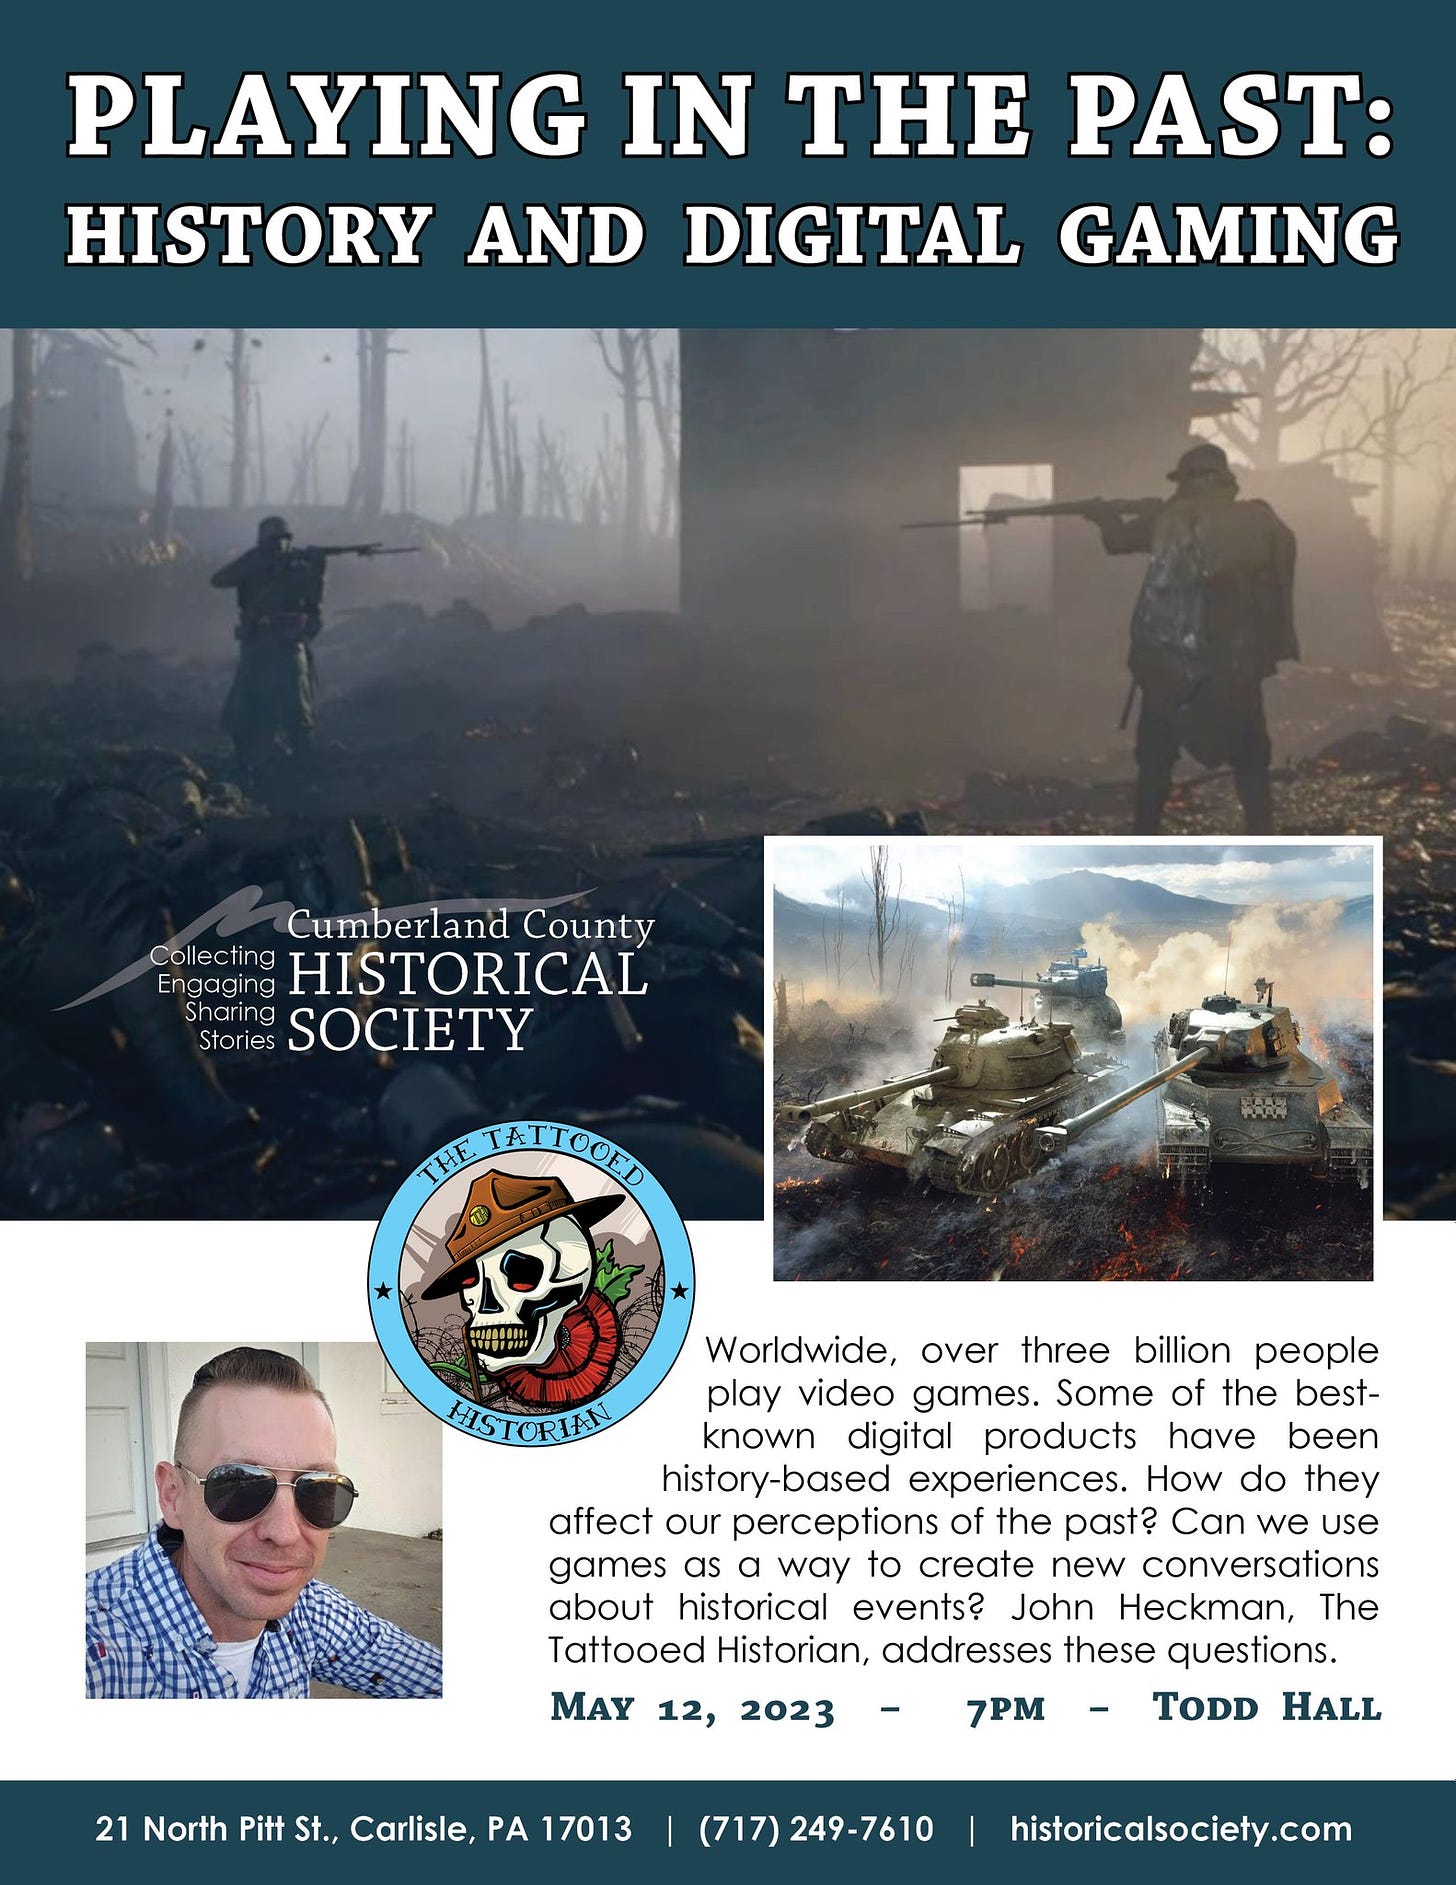 May be an image of 3 people and text that says 'PLAYING IN THE PAST: HISTORY AND DIGITAL GAMING Cumberland County Collecting lecting HISTORICAL Engag Stories Sharing SOCIETY THE-TATTOOED !!!! TORIAN Worldwide, over three billion people play video games. Some of the best- known digital products have been history-based experiences. How do they affect ou perceptions of the past? Can we use games a way to create new conversations about historical events? John Heckman, The Tattooed Historian, addresses these questions MAY 12, 2023- 2023 7PM TODD HALL 21 North Pitt St., Carlisle, PA 17013 (717) 249-7610 historicalsociety.com'